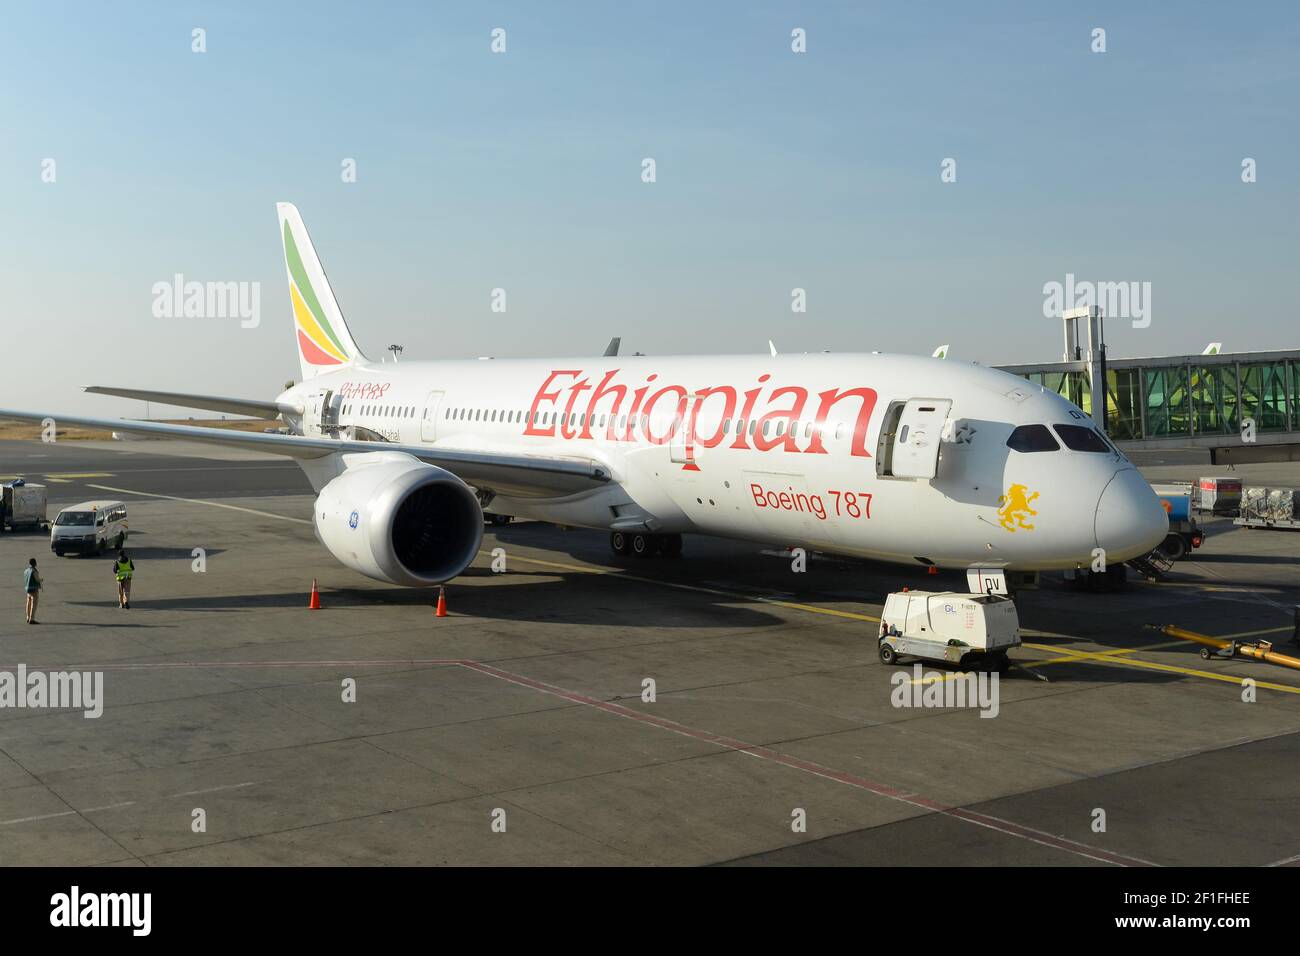 Ethiopian Airlines Boeing 787 airplane parked at Addis Ababa Bole International Airport in Ethiopia. B787 Dreamliner aircraft. Stock Photo